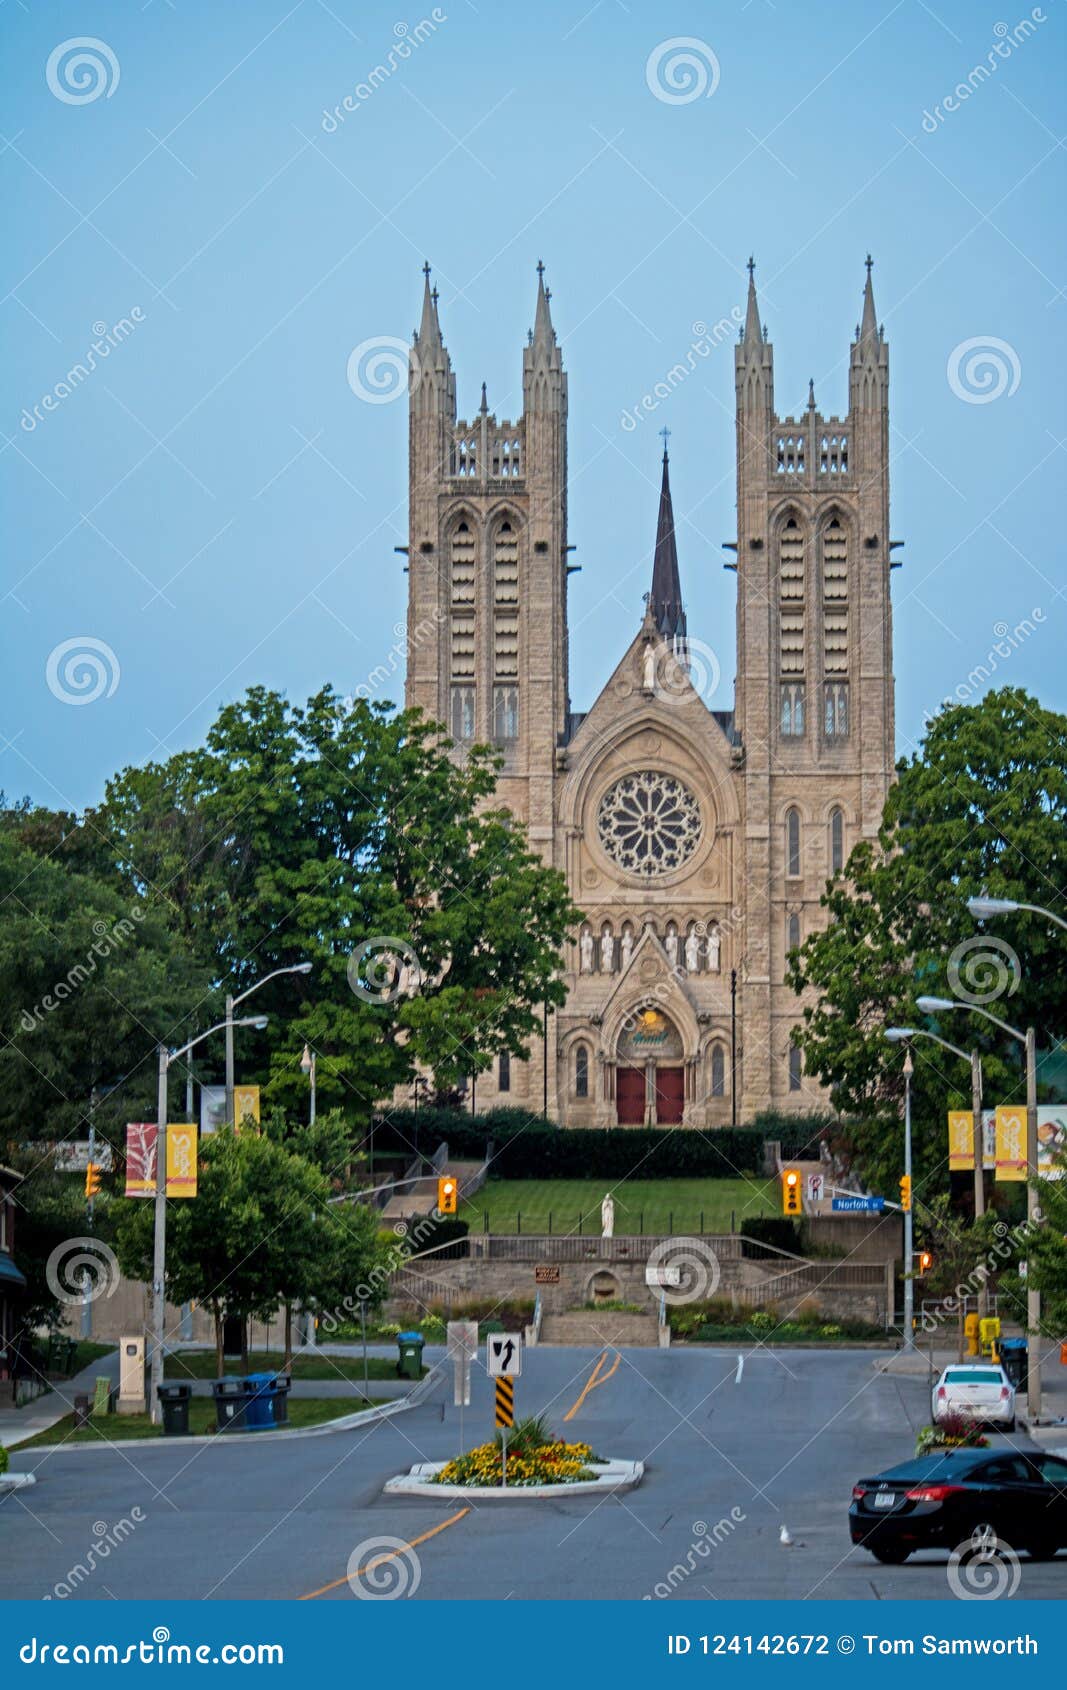 Basilica of Our Lady Immaculate in Guelph, Ontario, Canada